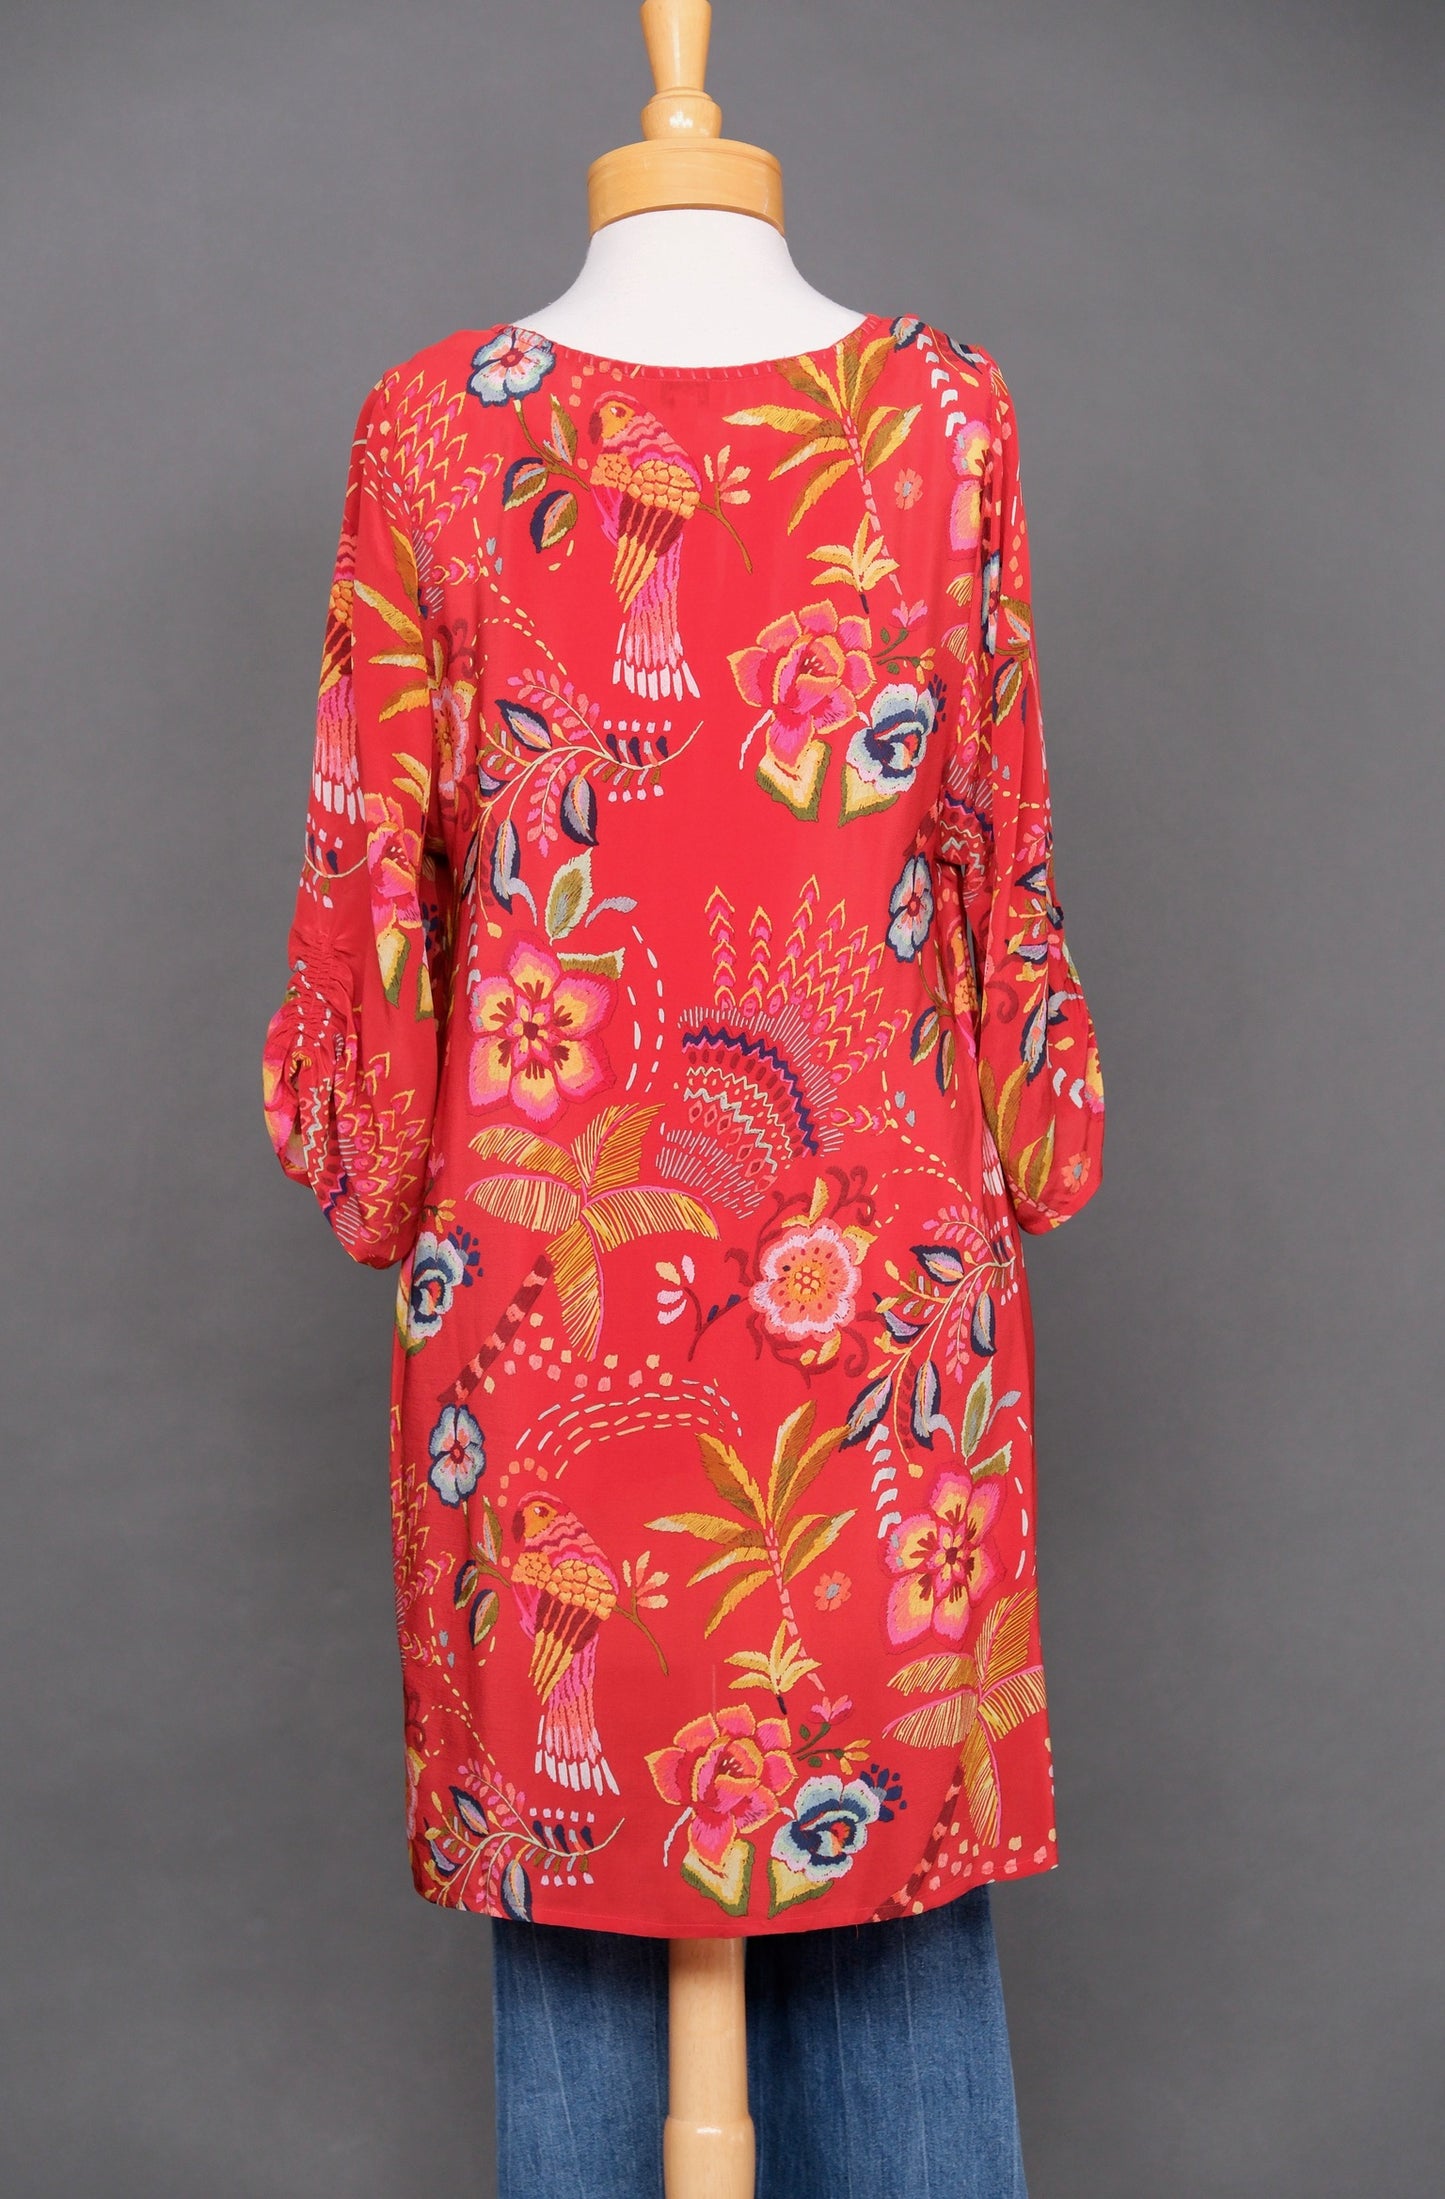 Tolani Tunic/Dress in Red Flower